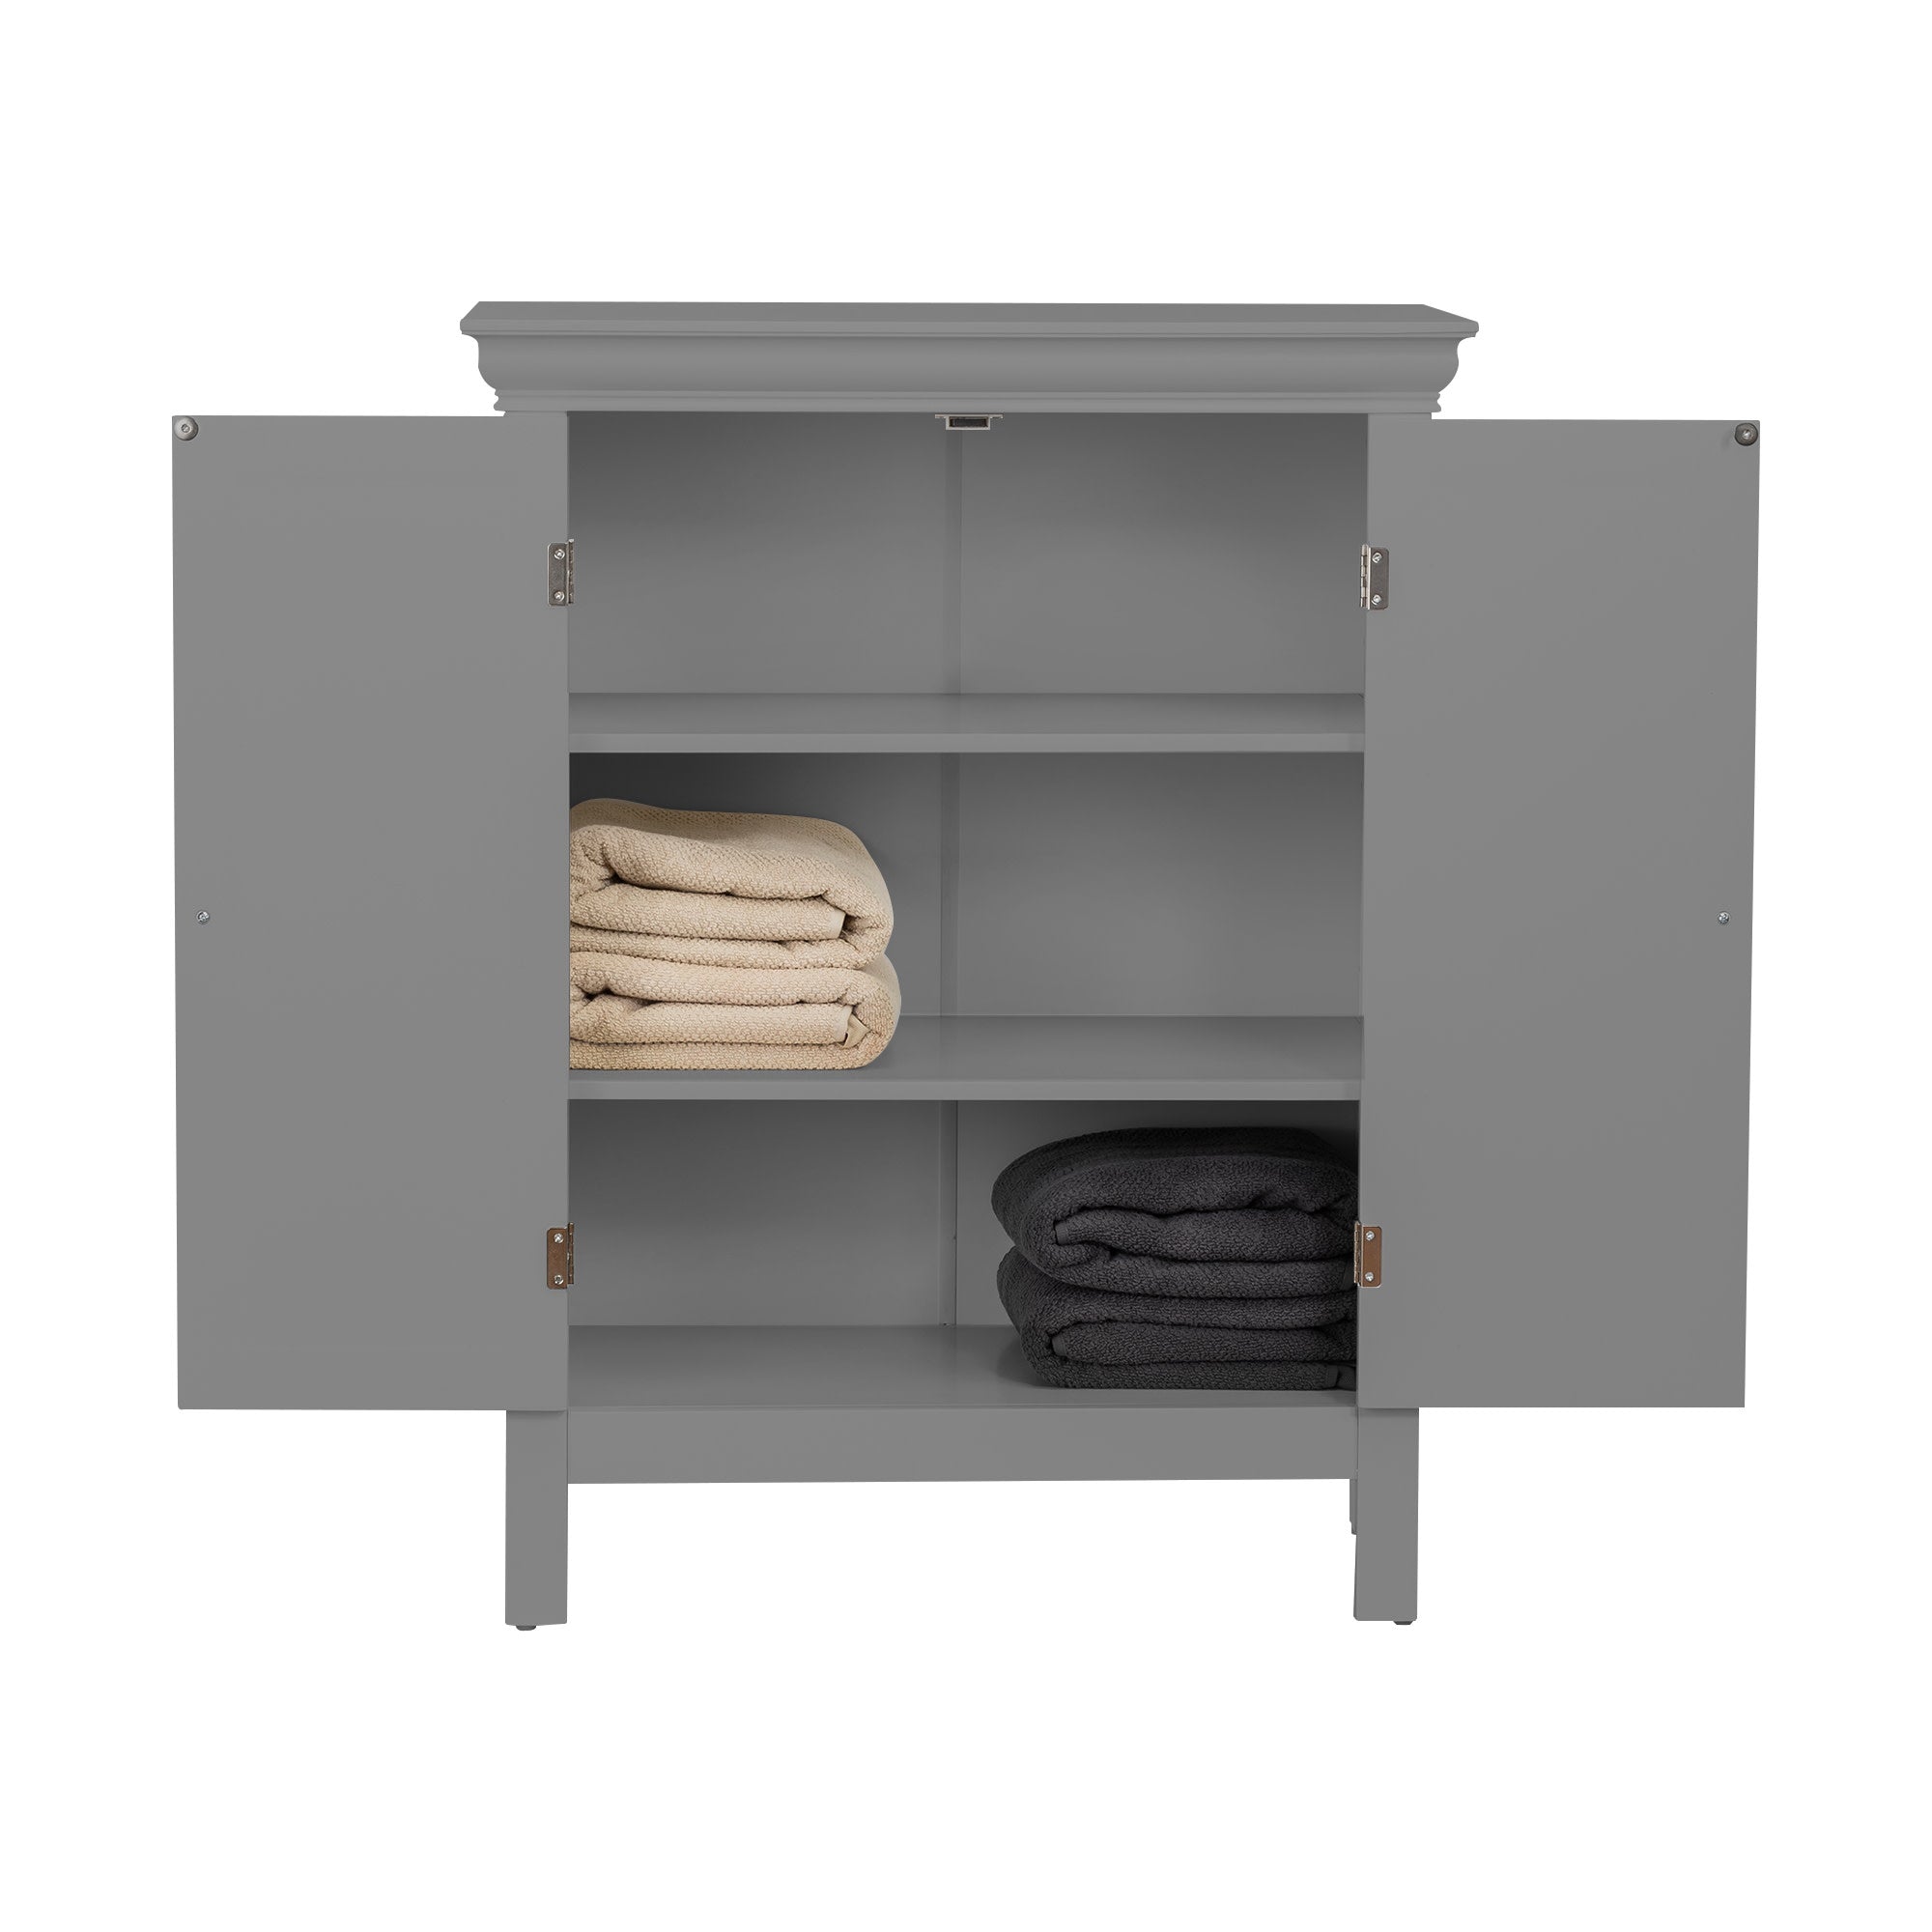 Teamson Home Stratford Contemporary Wooden Floor Storage Cabinet with Two Doors, Gray